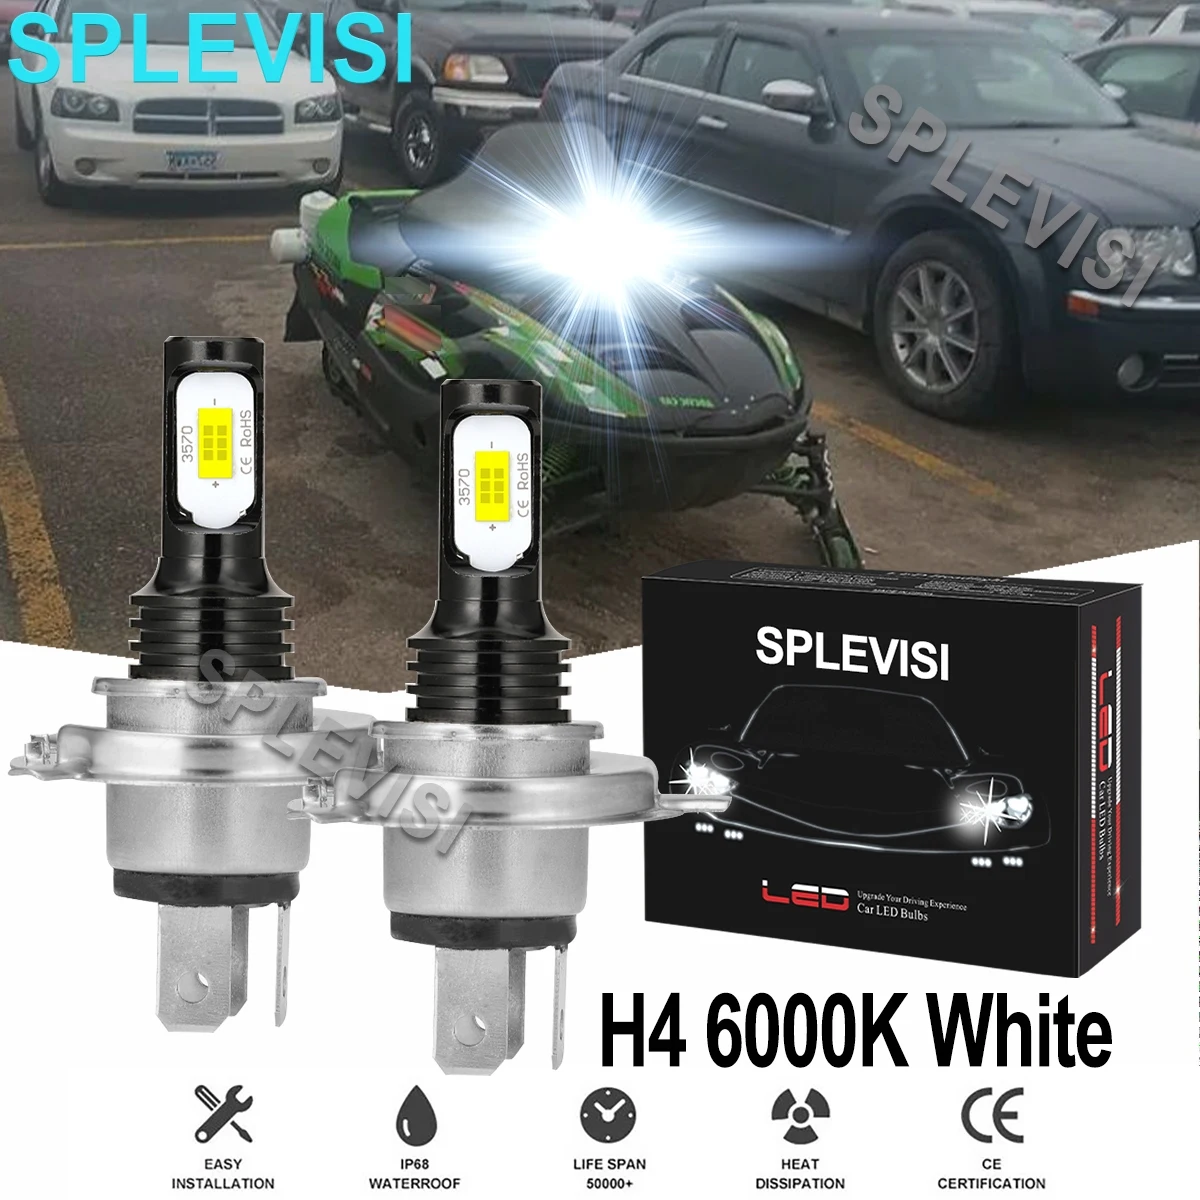 2x 70W white led headlight 8000K For Arctic Cat 250 300 350 366 400 425 450  Snowmoble